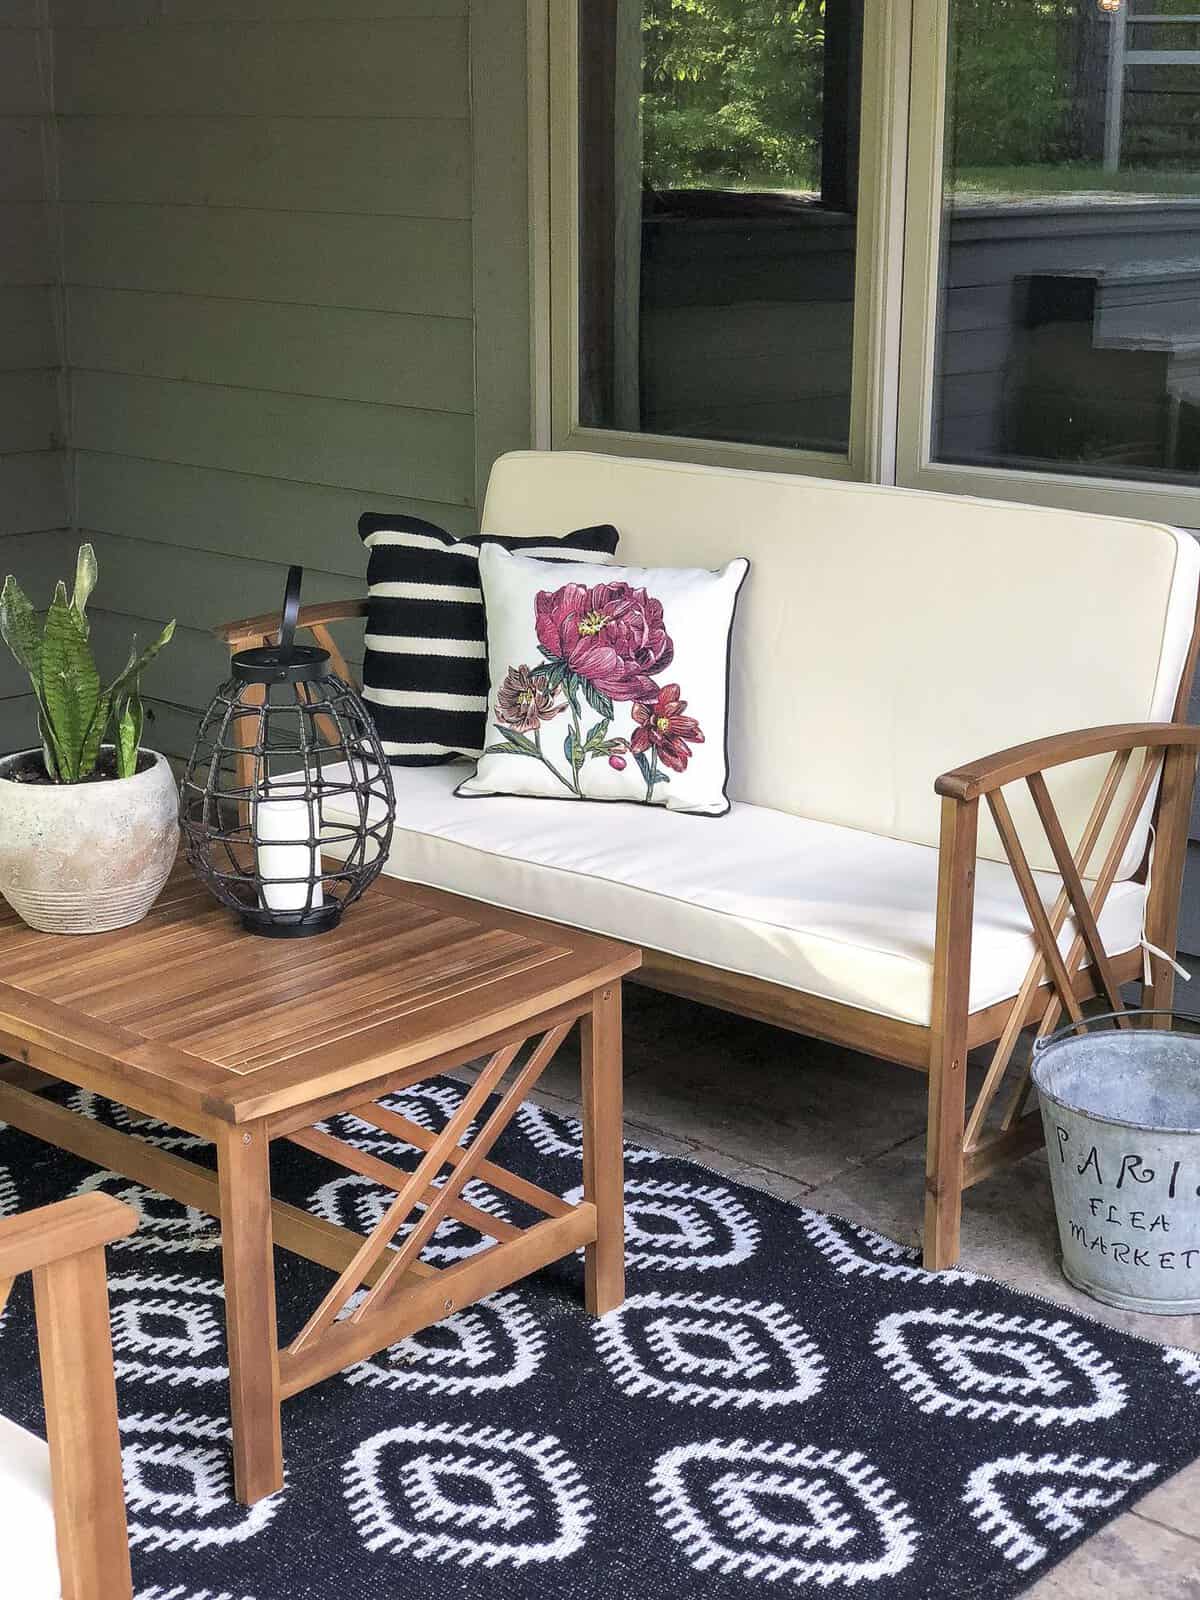 Are you looking for easy updates to make your outdoor living space more livable? Today I'm giving you five ways to update your outdoor living space to make it an enjoyable oasis to enjoy all summer long and well into the fall. Read more for 5 easy tips!